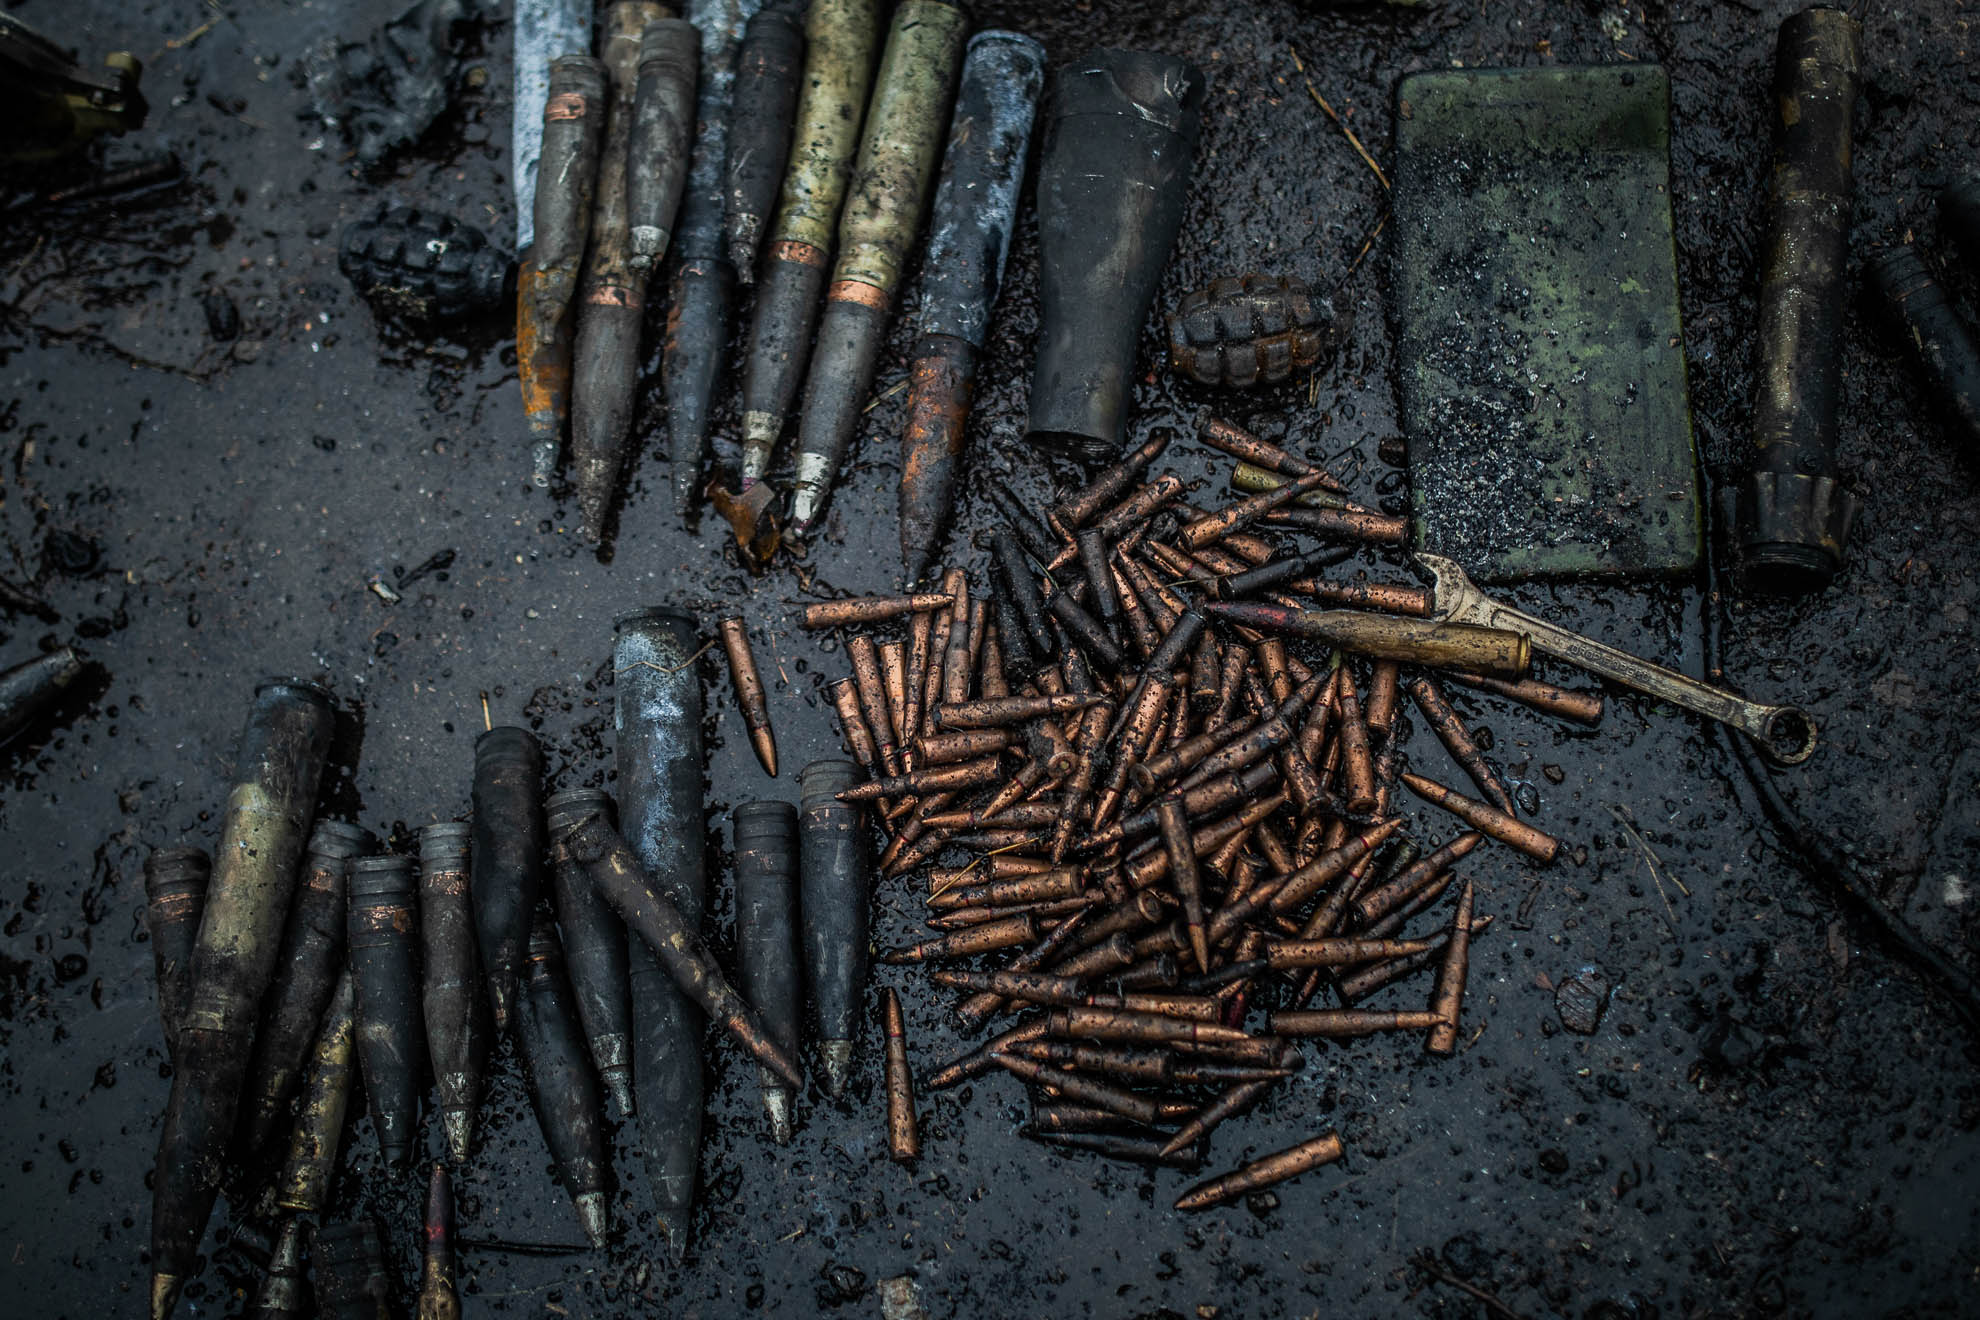 Ammunition recovered by Ukrainian security forces from destroyed Russian tanks on one of the roads leading to the localities of Irpin and Bucha, April 1, 2022.